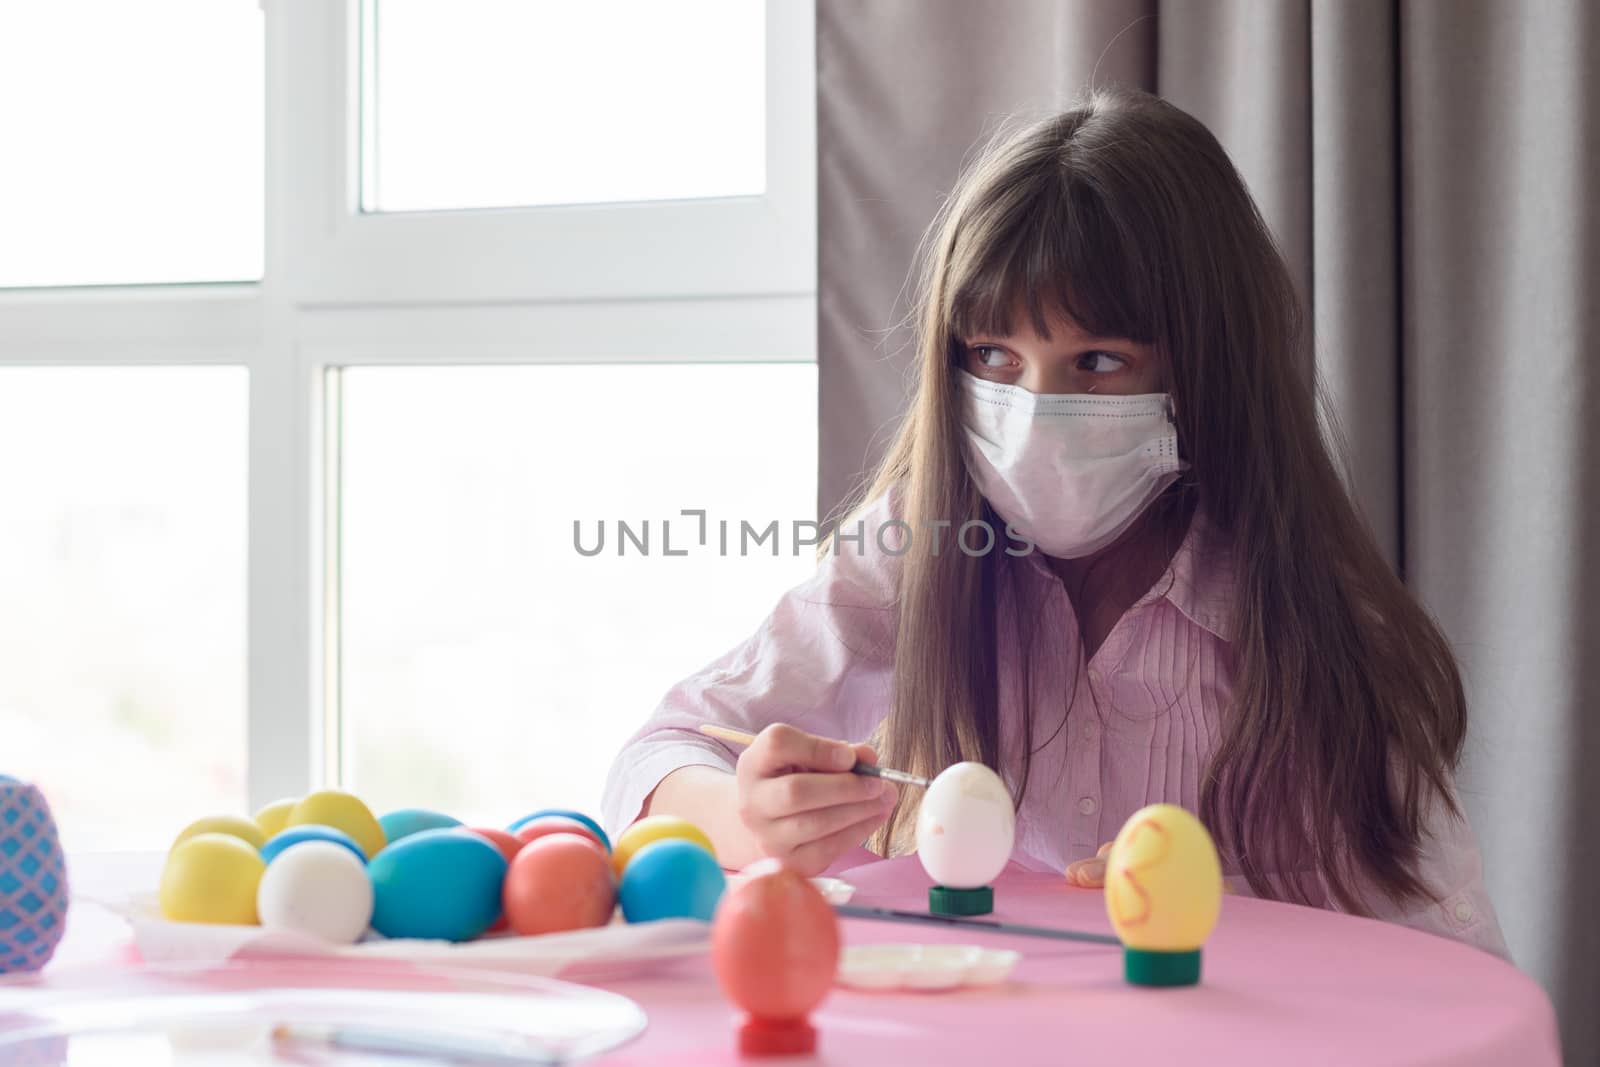 The sick girl alone paints Easter eggs for the holiday